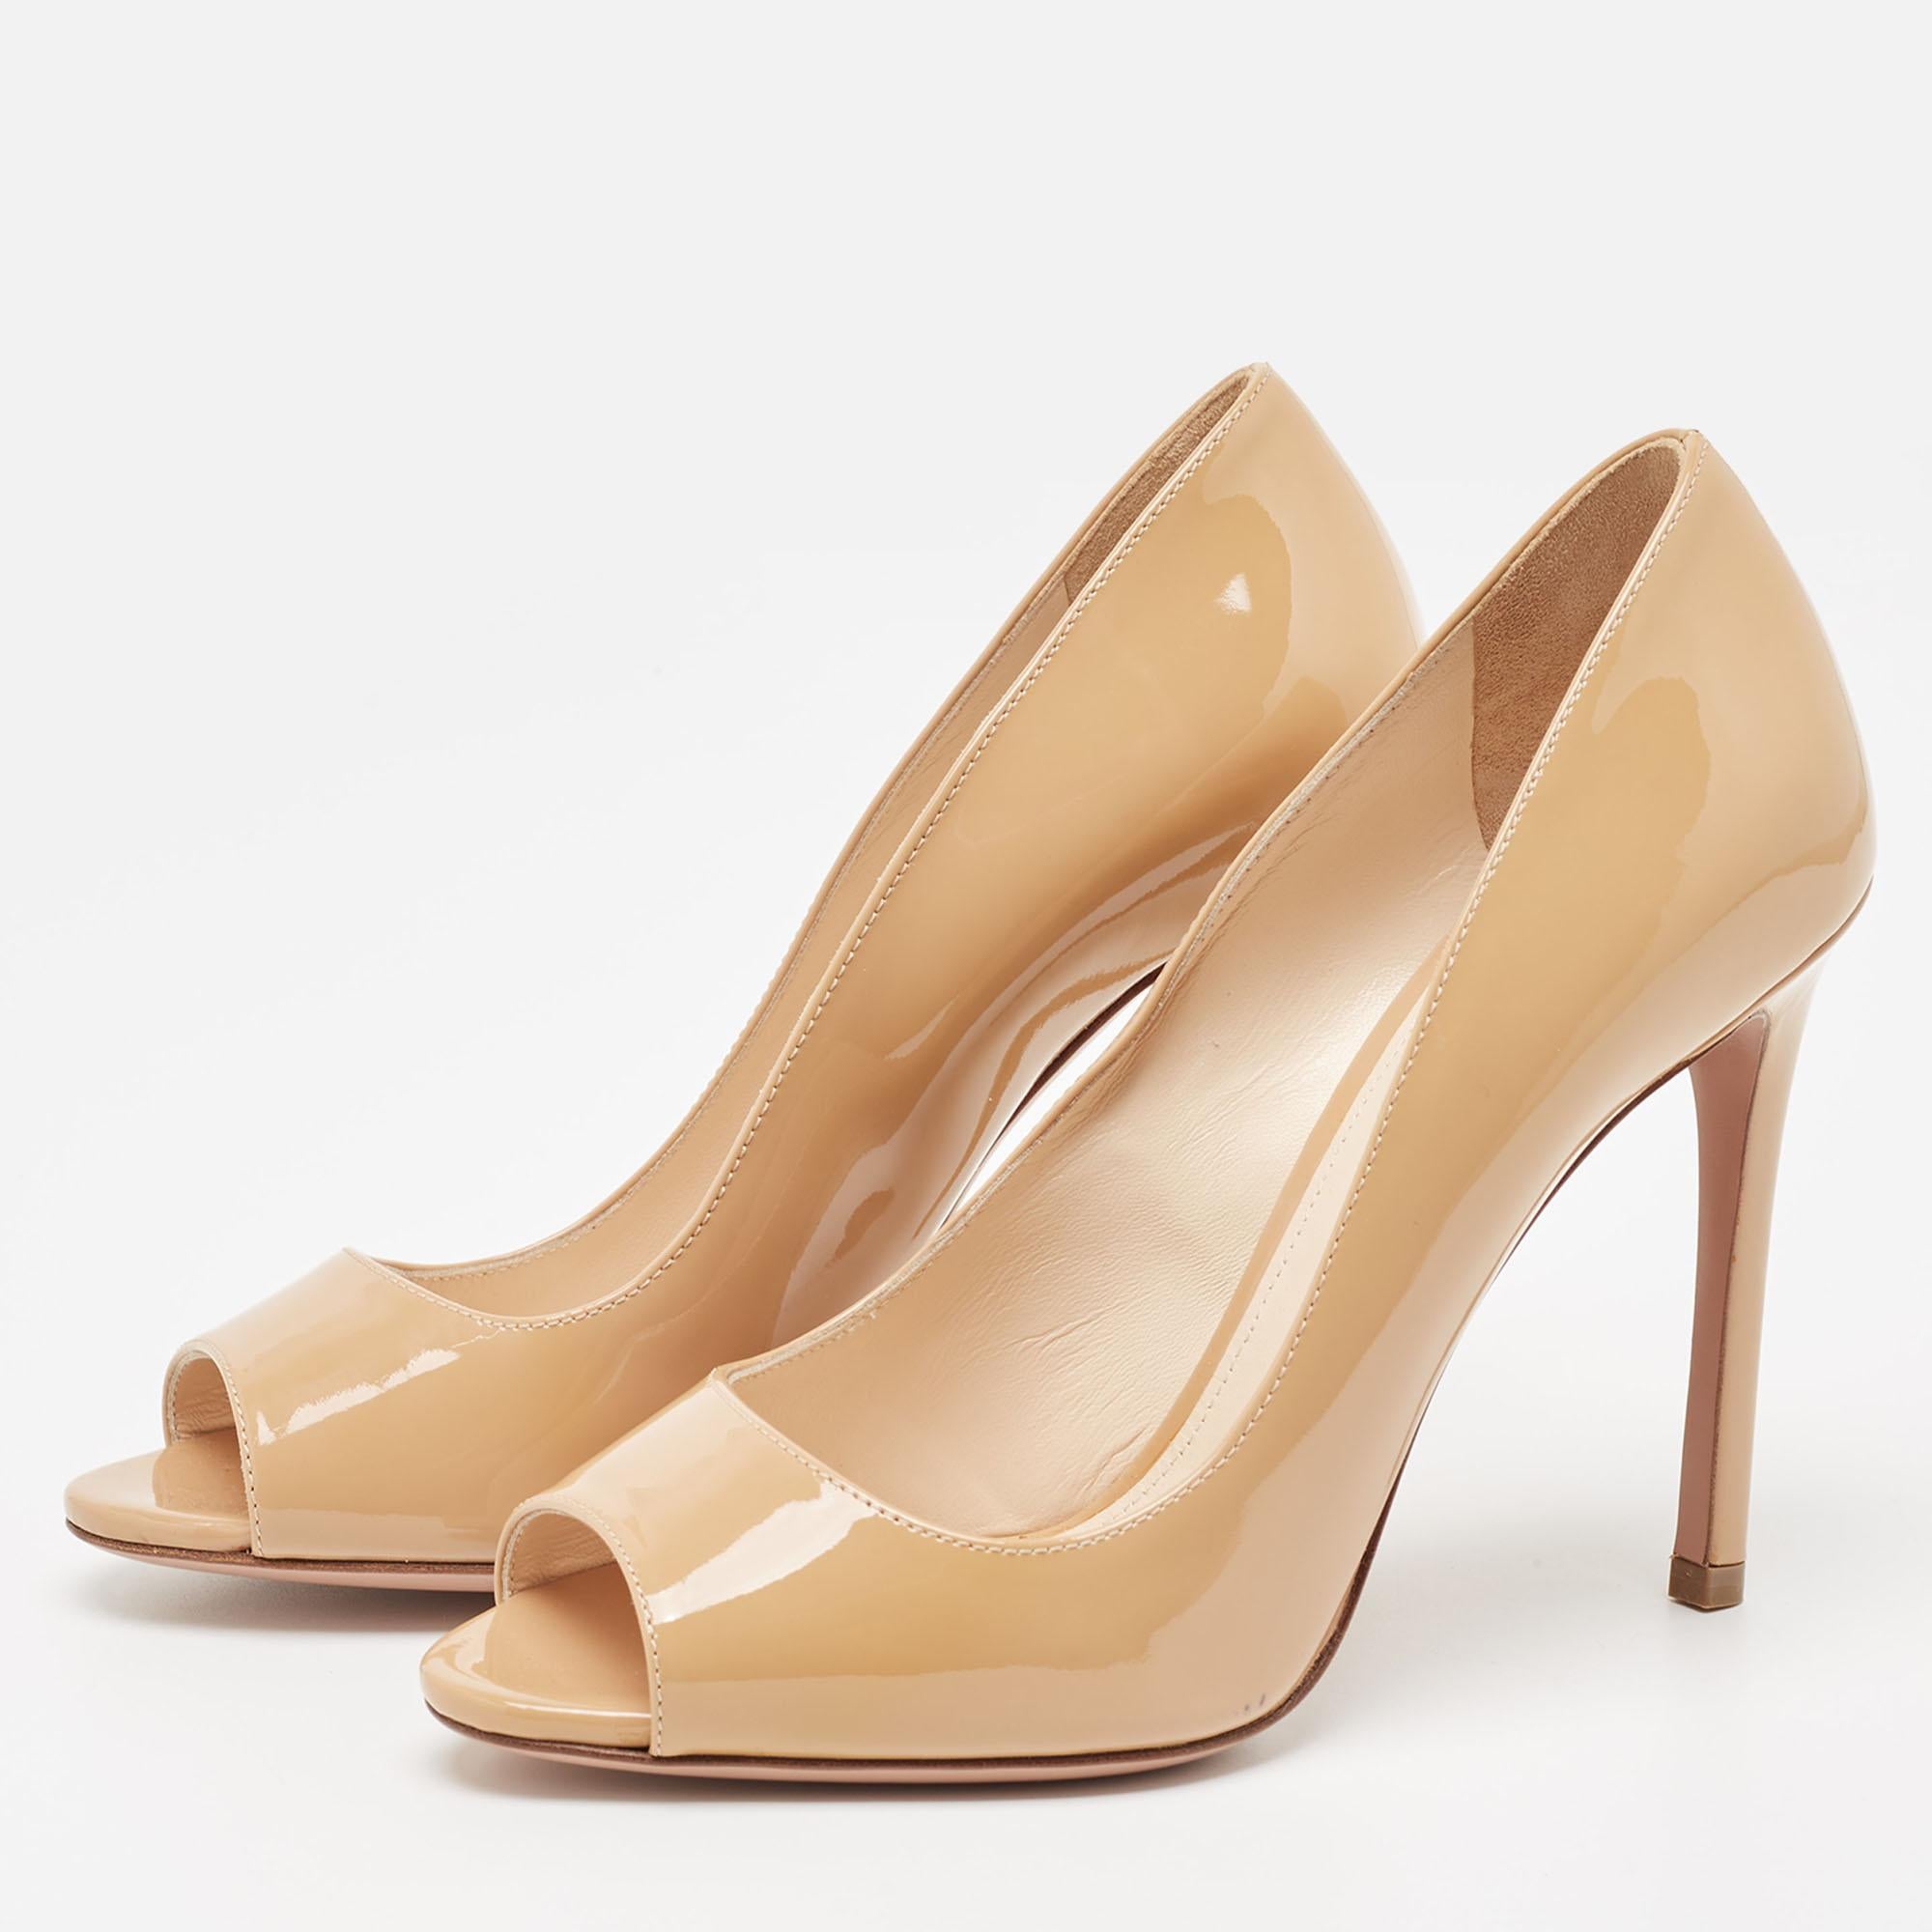 Exuding femininity and elegance, these Prada pumps feature a chic silhouette with an attractive design. You can wear these pumps for a stylish look.

